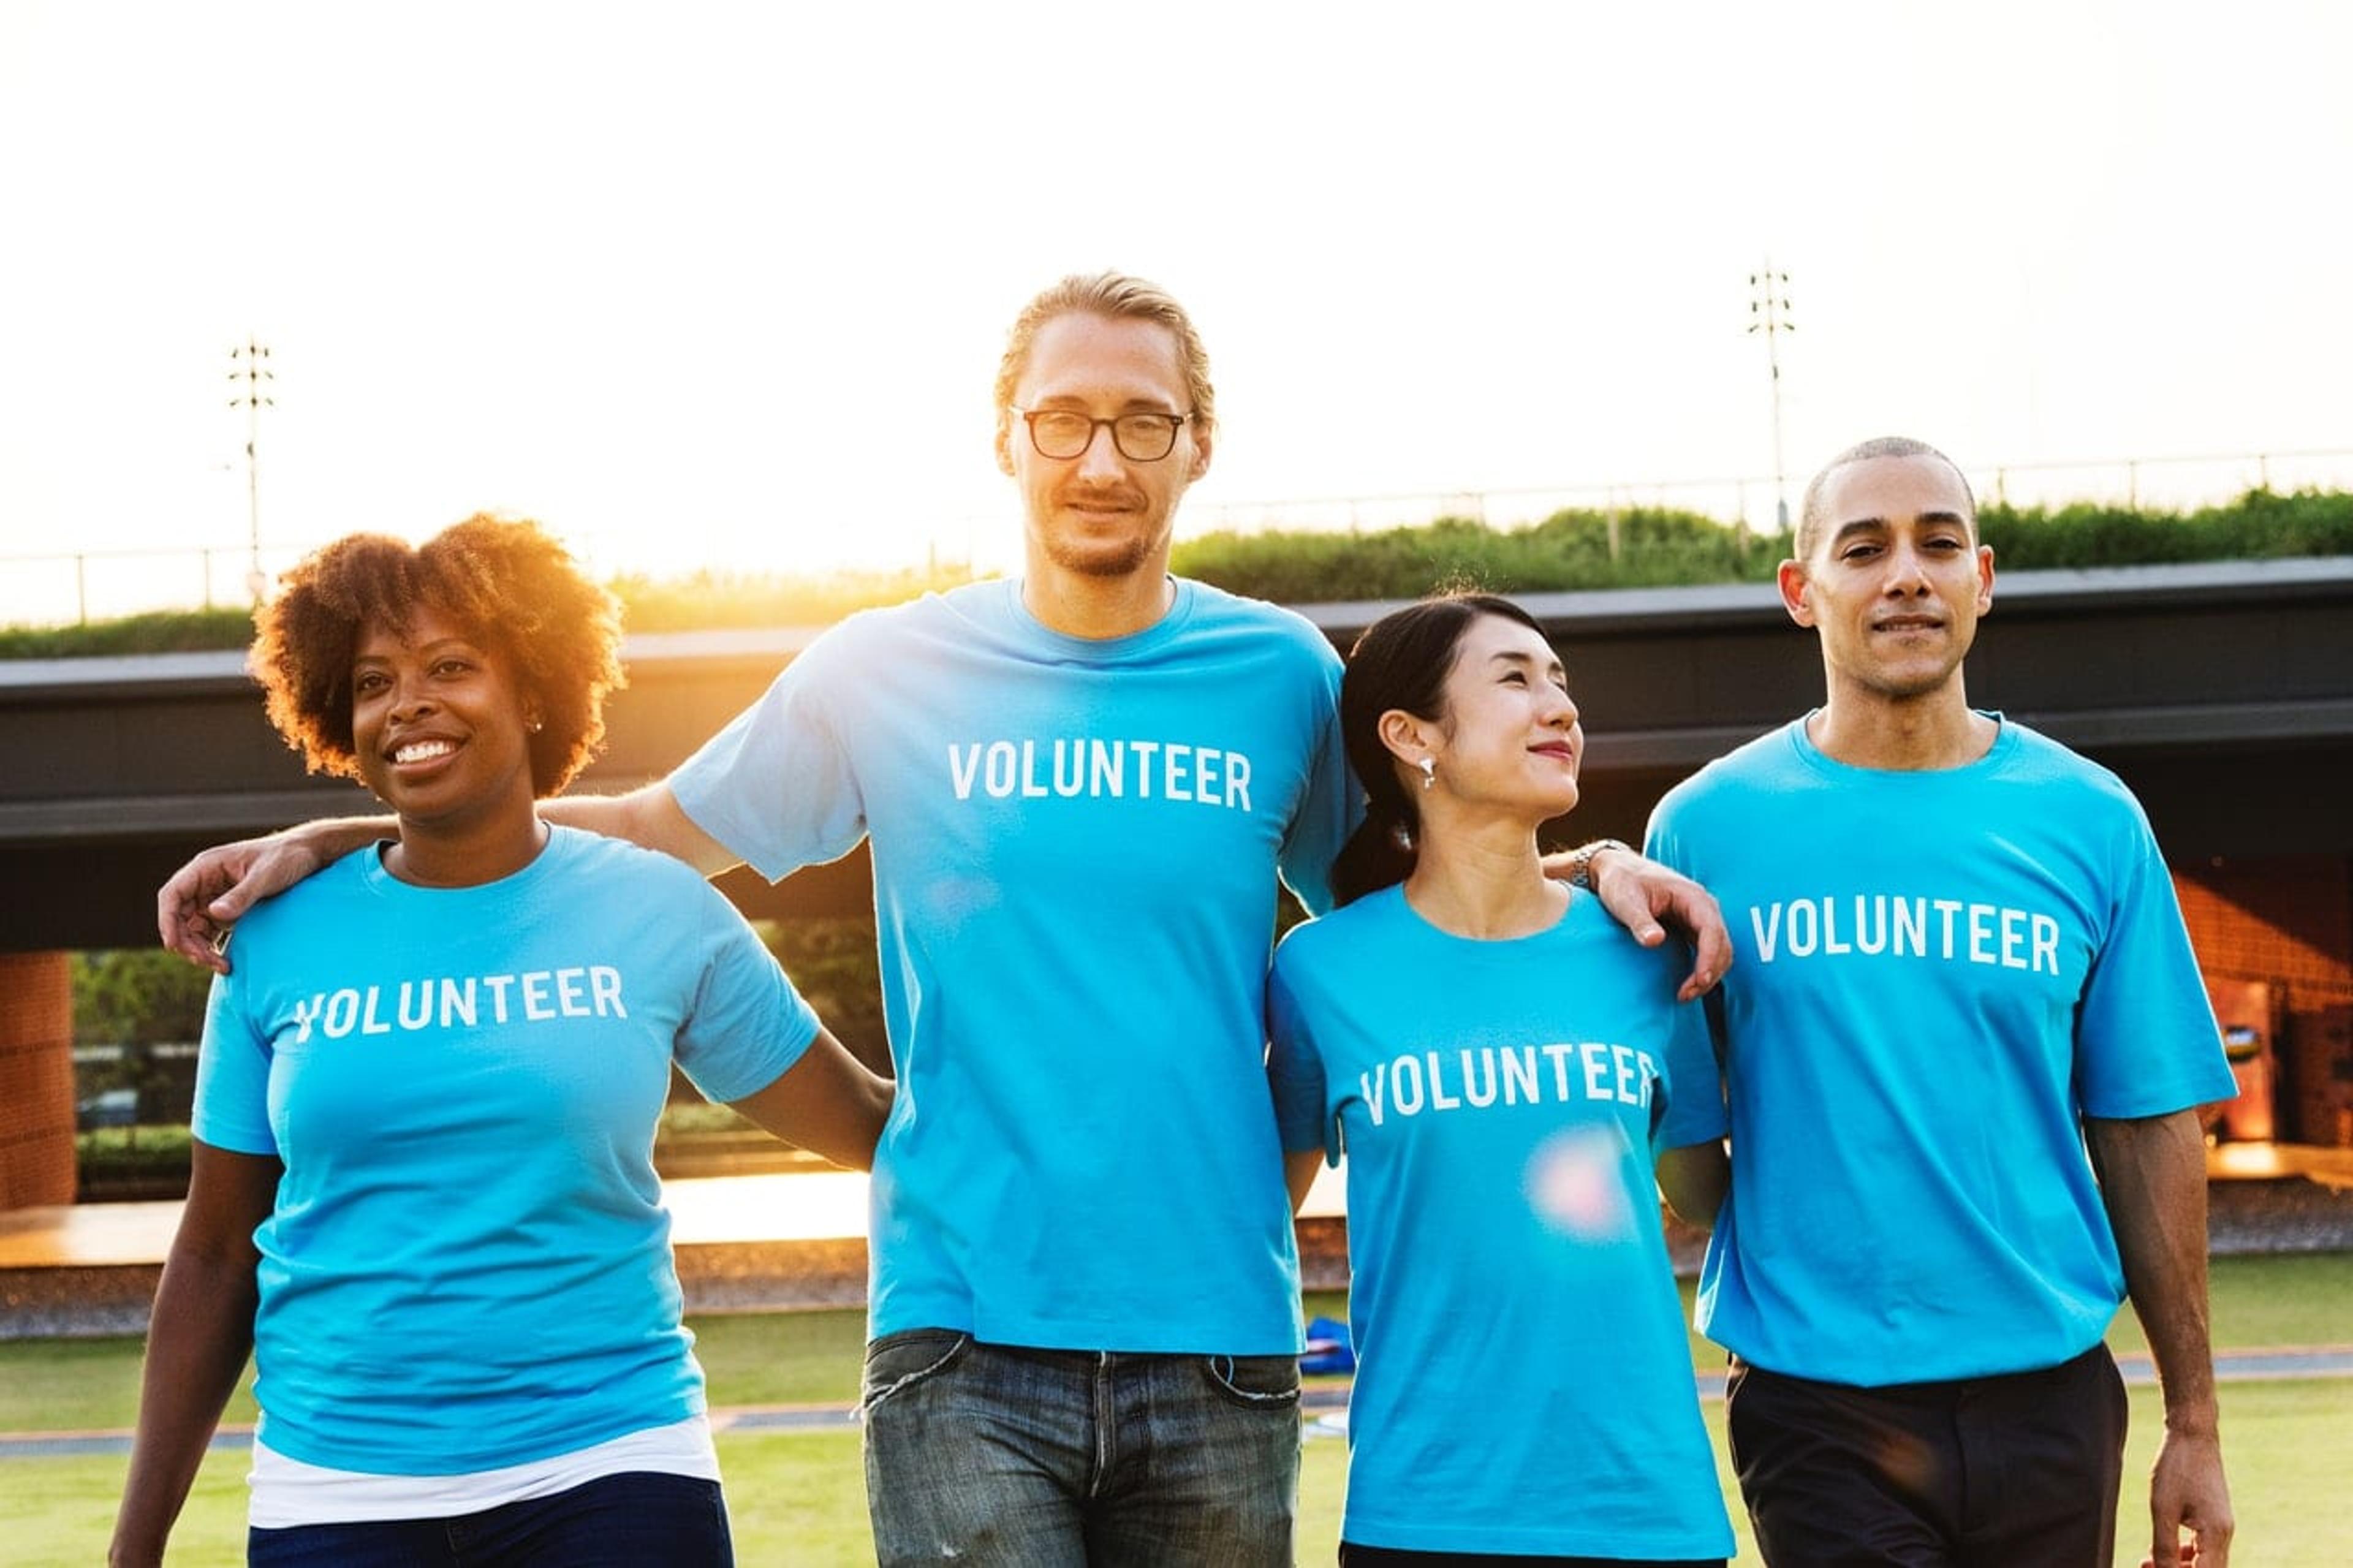 Volunteering Can Have an Impact on How You Lead